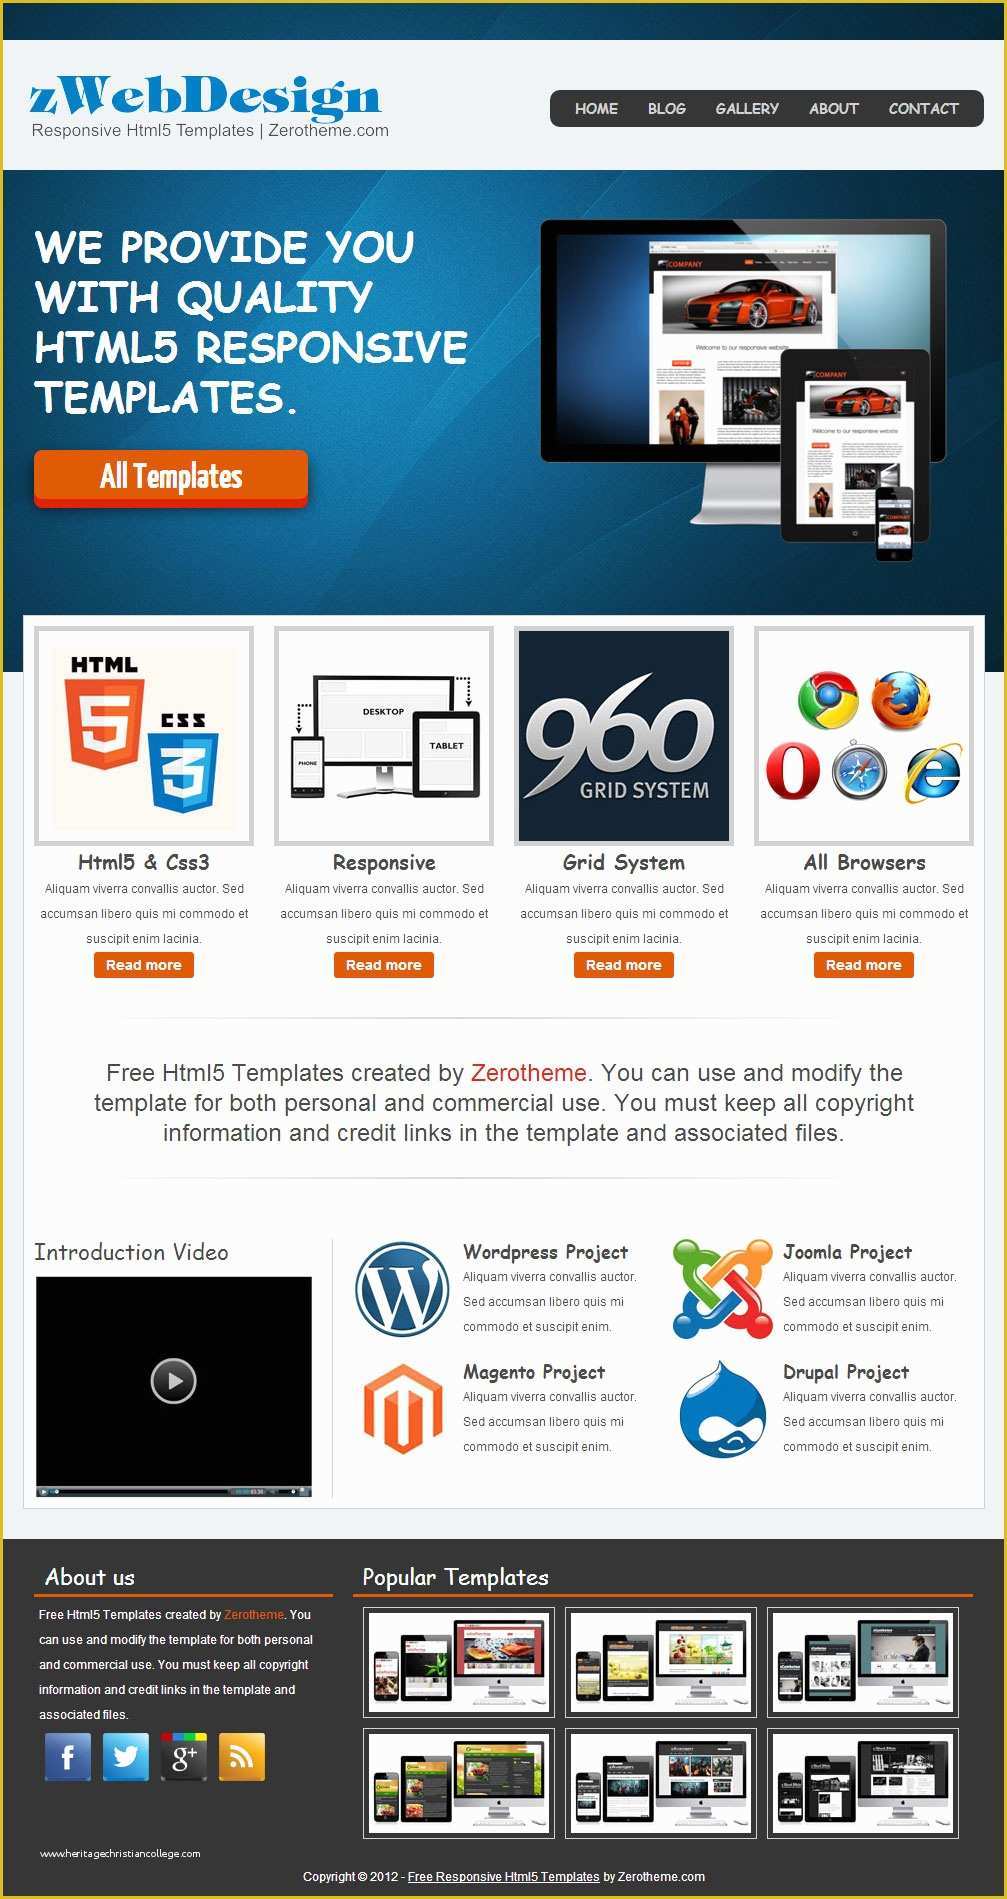 Free Responsive Blog Website Templates Of Best Collection Of 10 Free Responsive Design HTML5